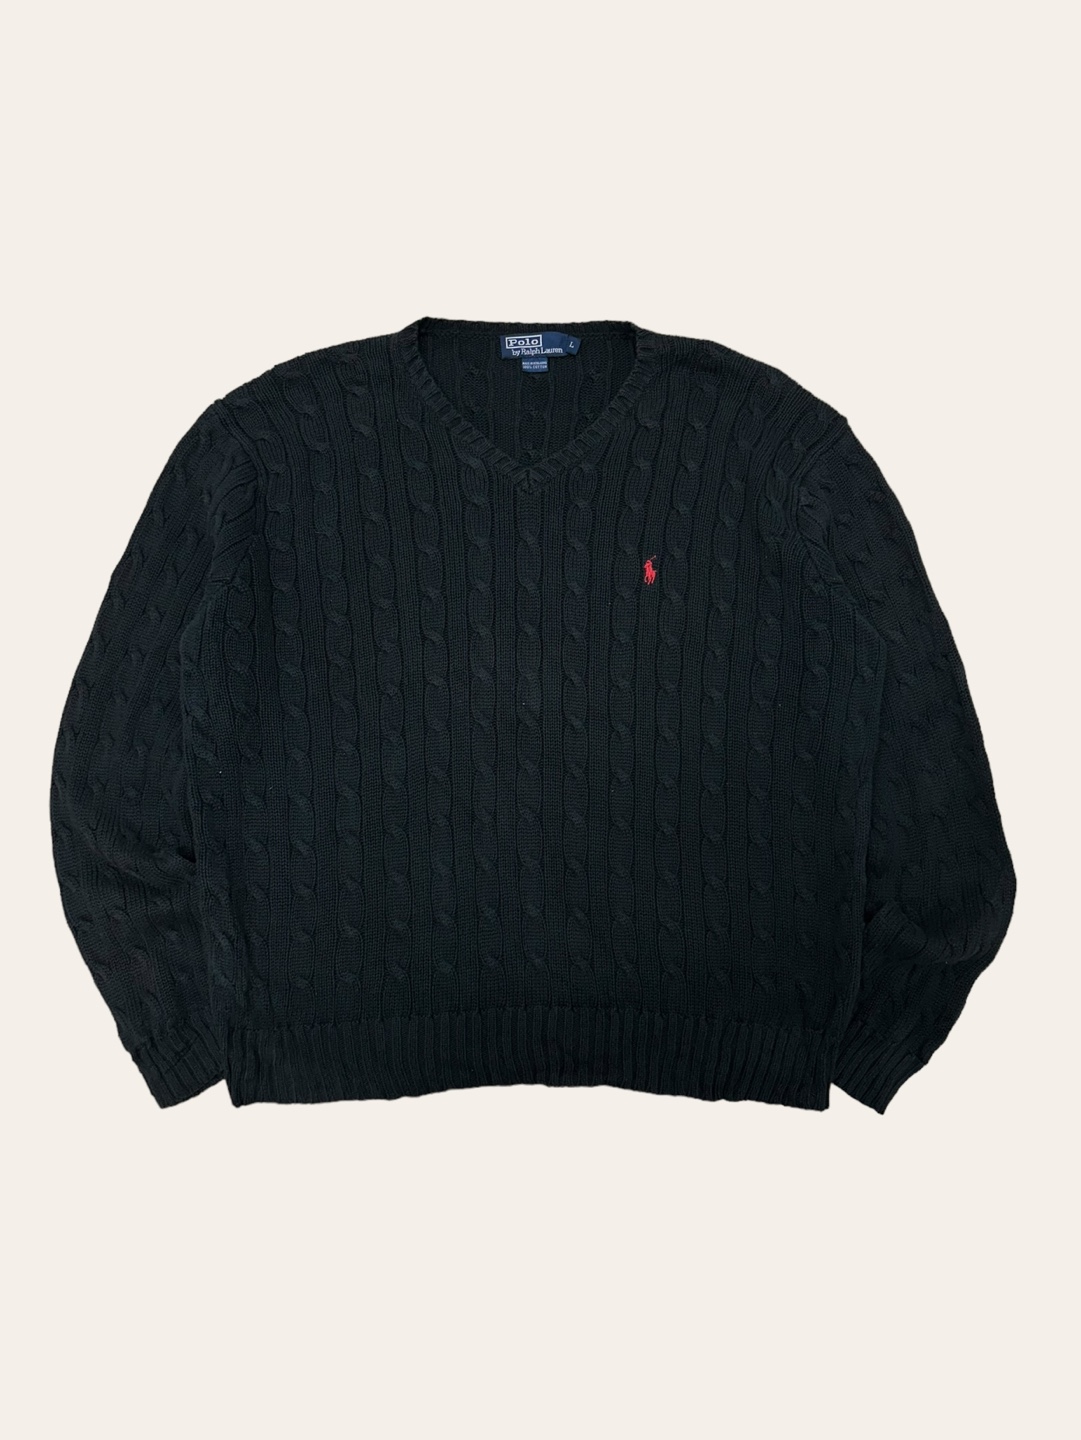 (From USA)Polo ralph lauren black cotton cable v-neck sweater L